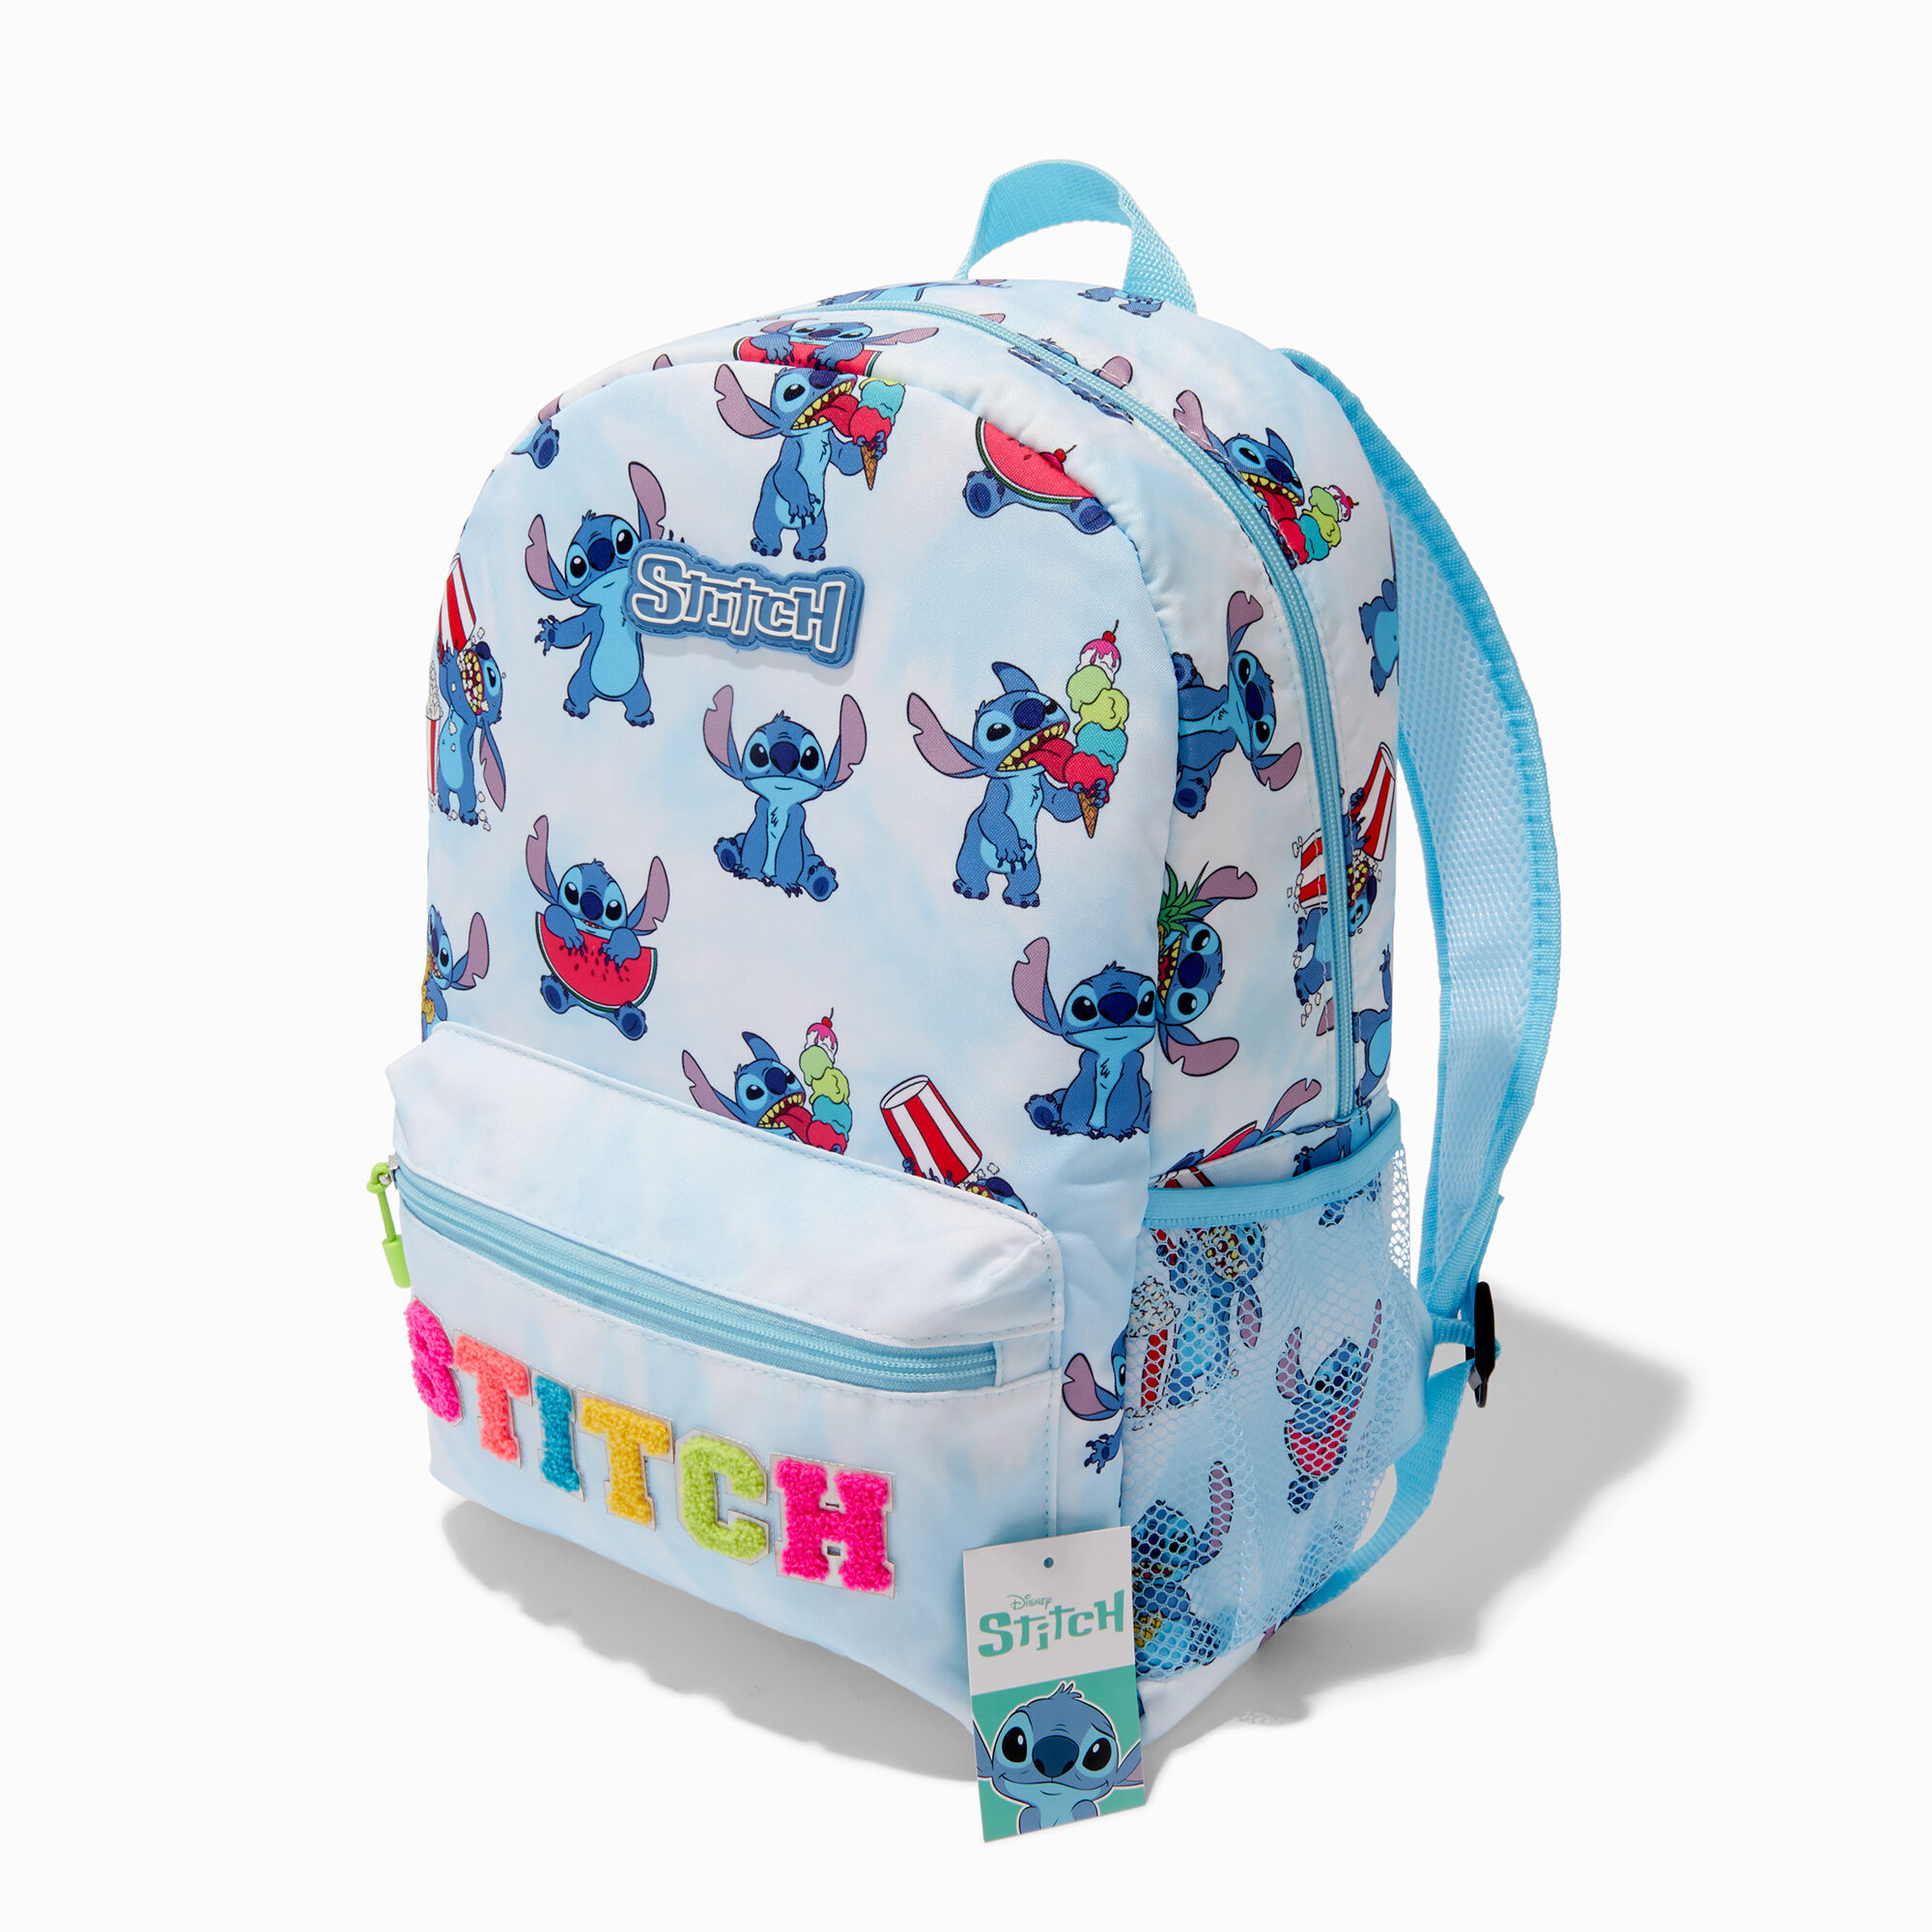 View Disney Stitch Claires Exclusive Foodie Backpack information